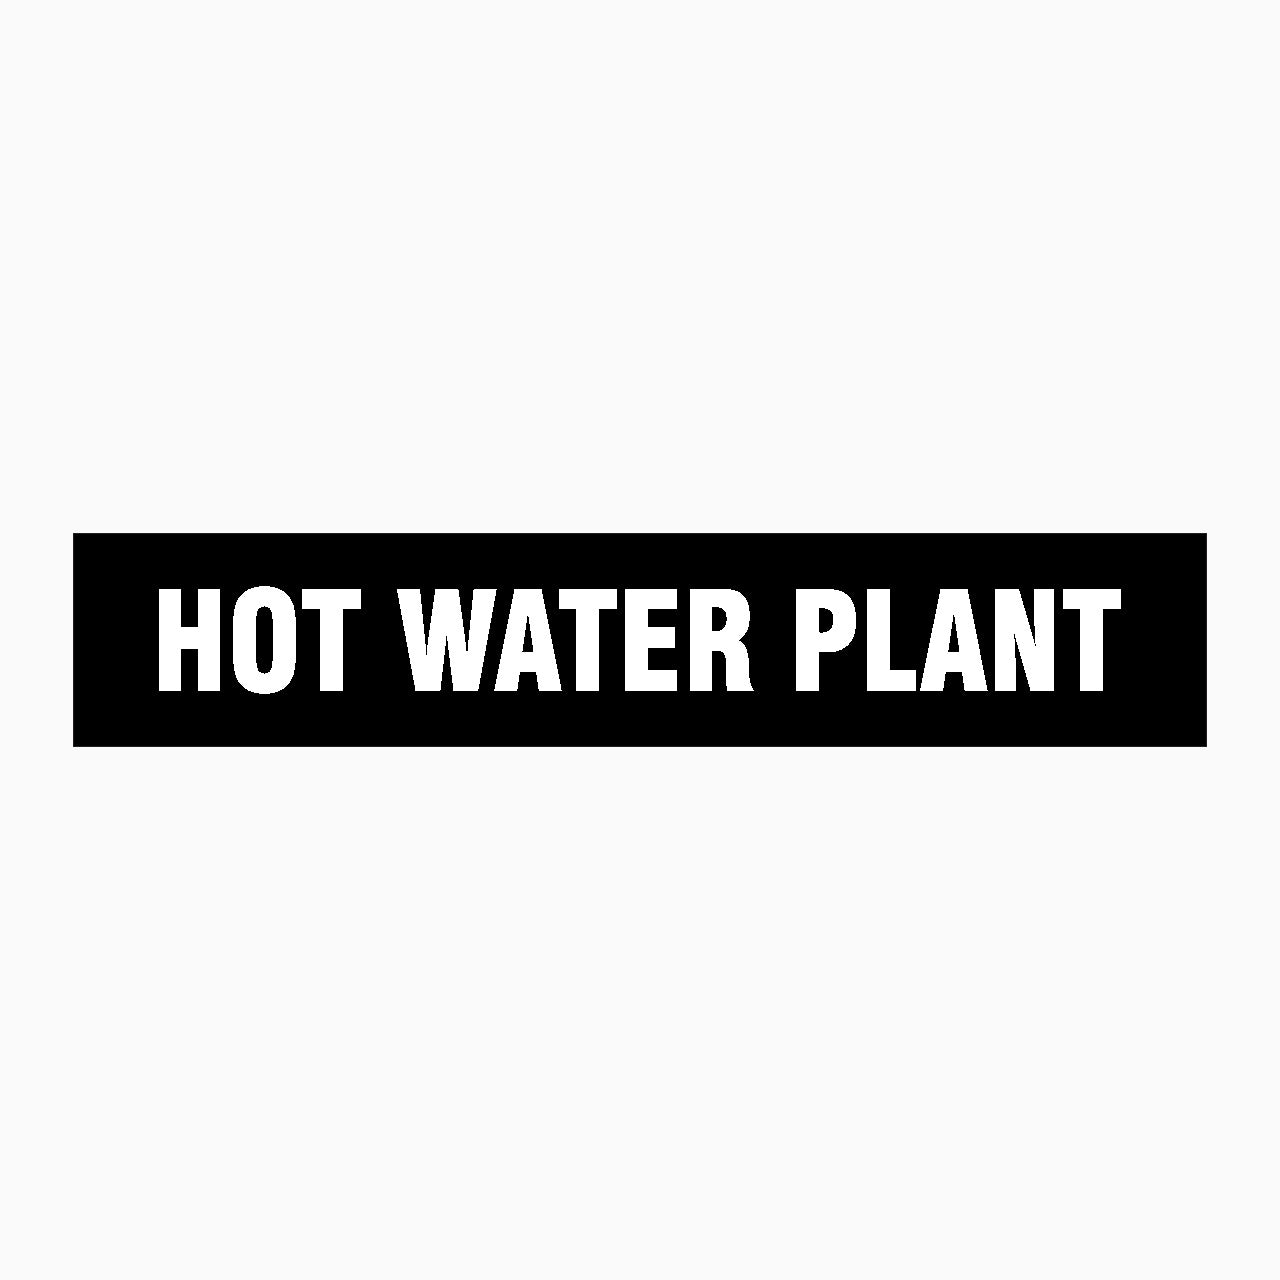 HOT WATER PLANT SIGN